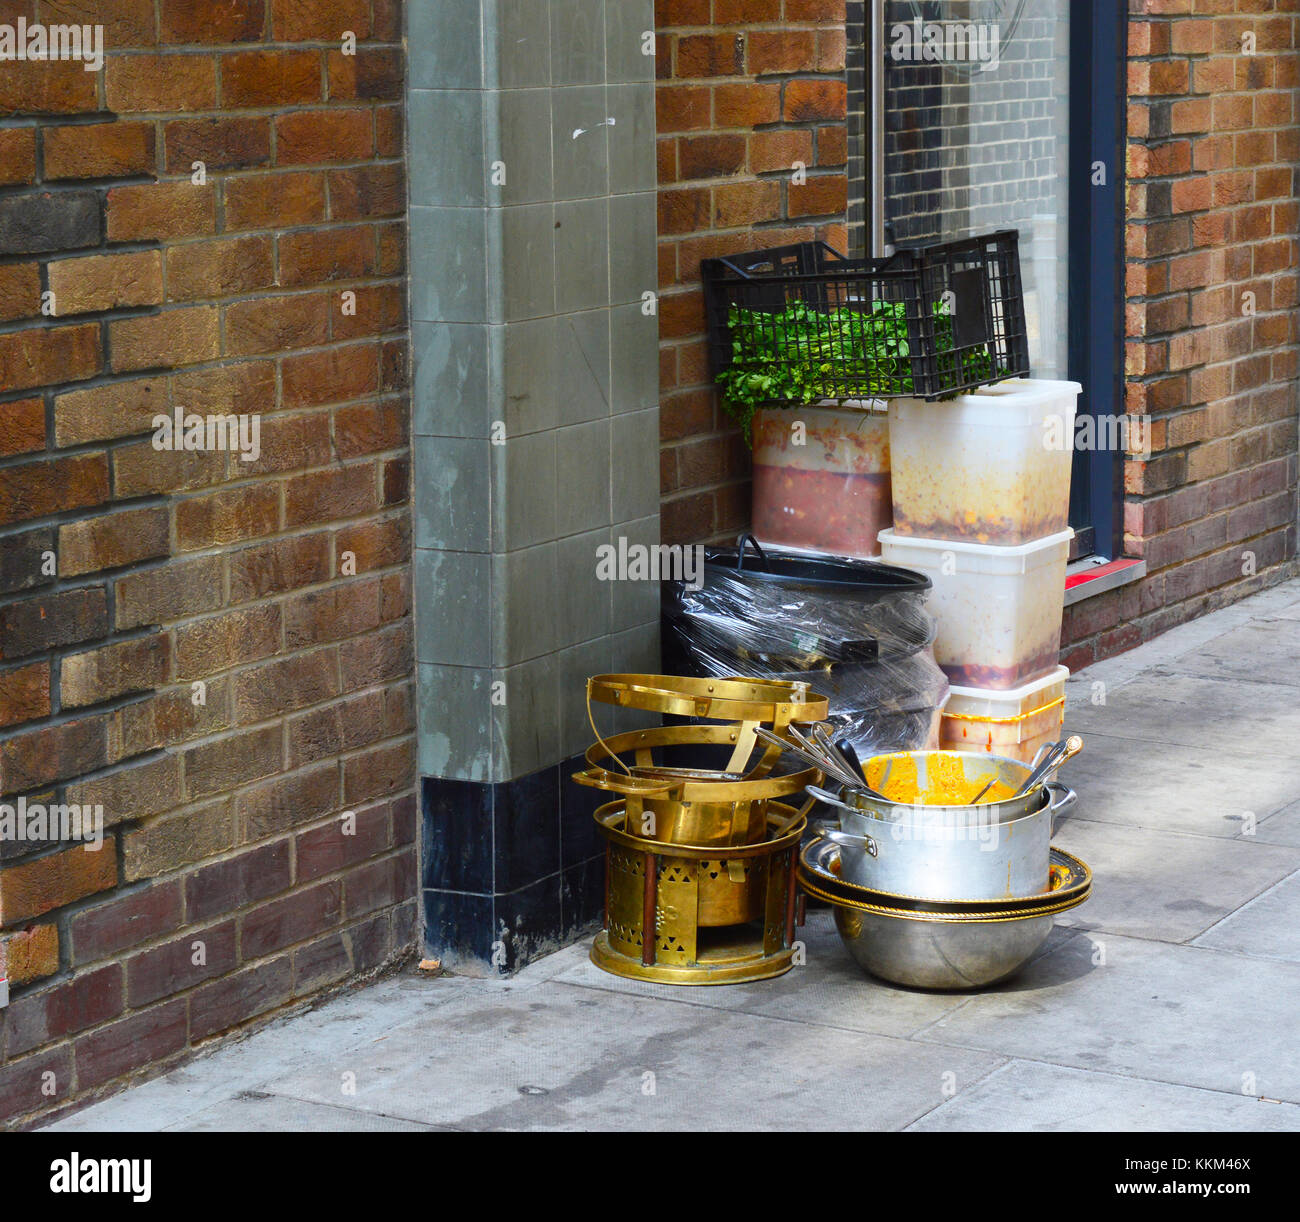 A photo of dirty dishes and food prep sitting out on the street Stock Photo